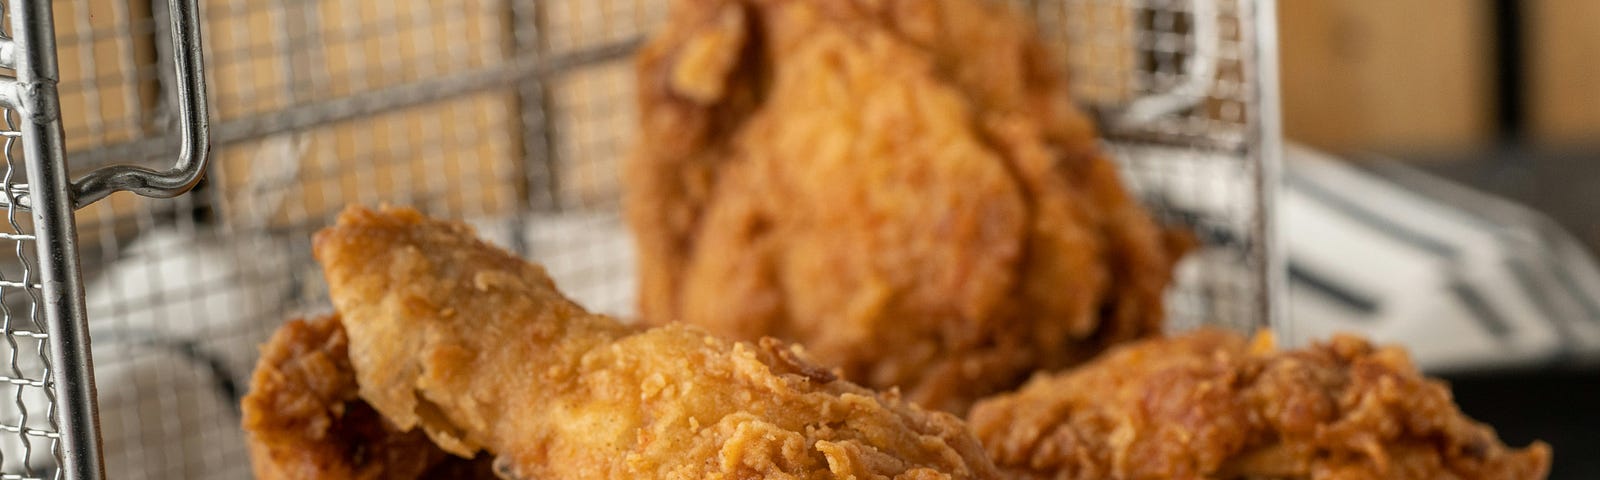 A picture of fresh fried chicken.